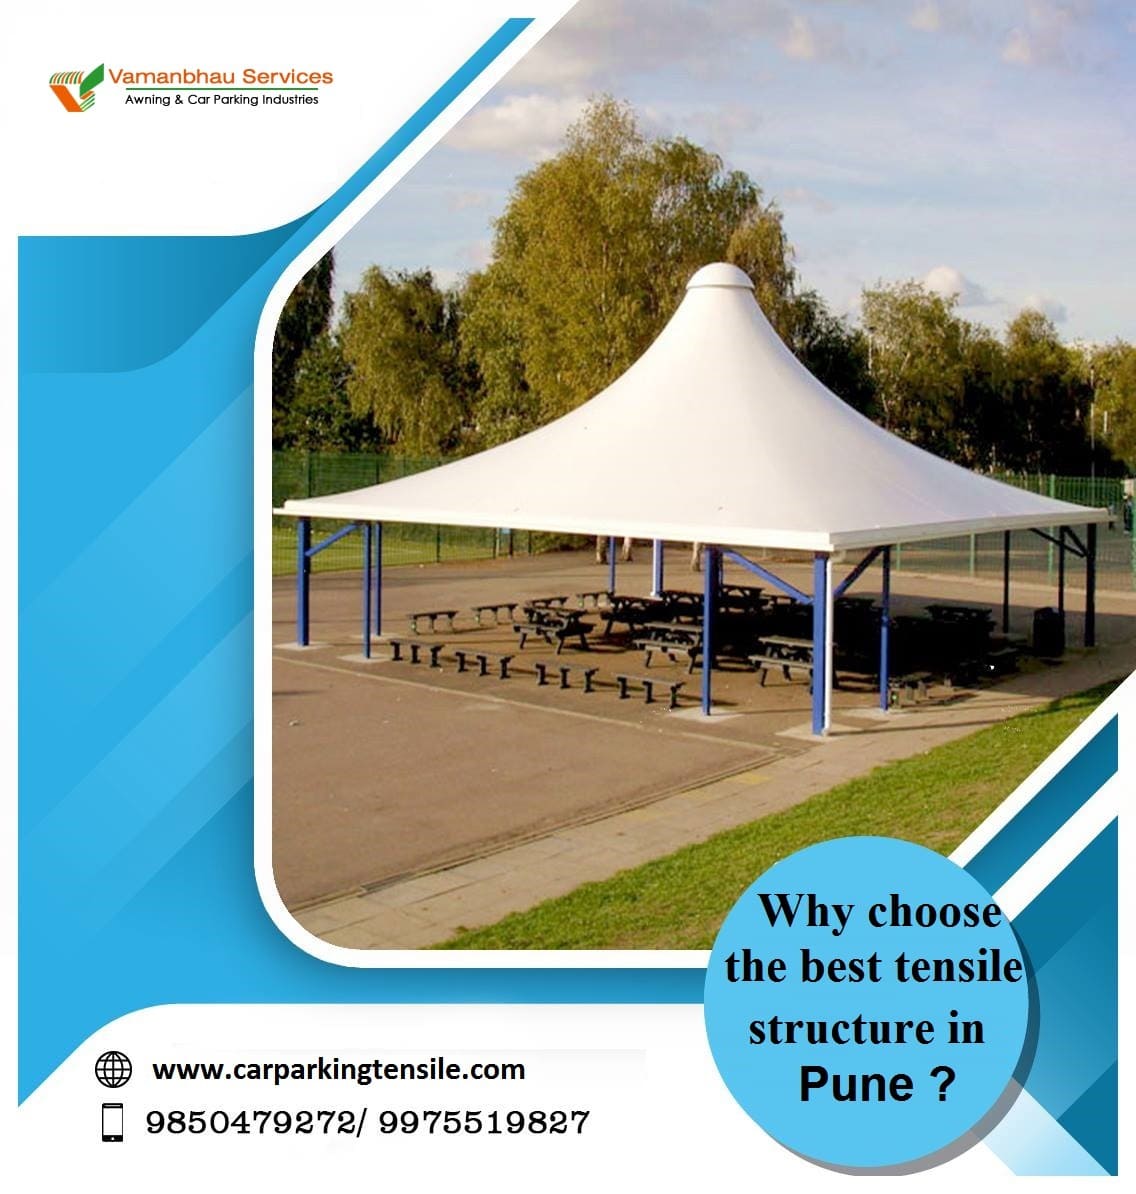 Why choose the best tensile structure in Pune